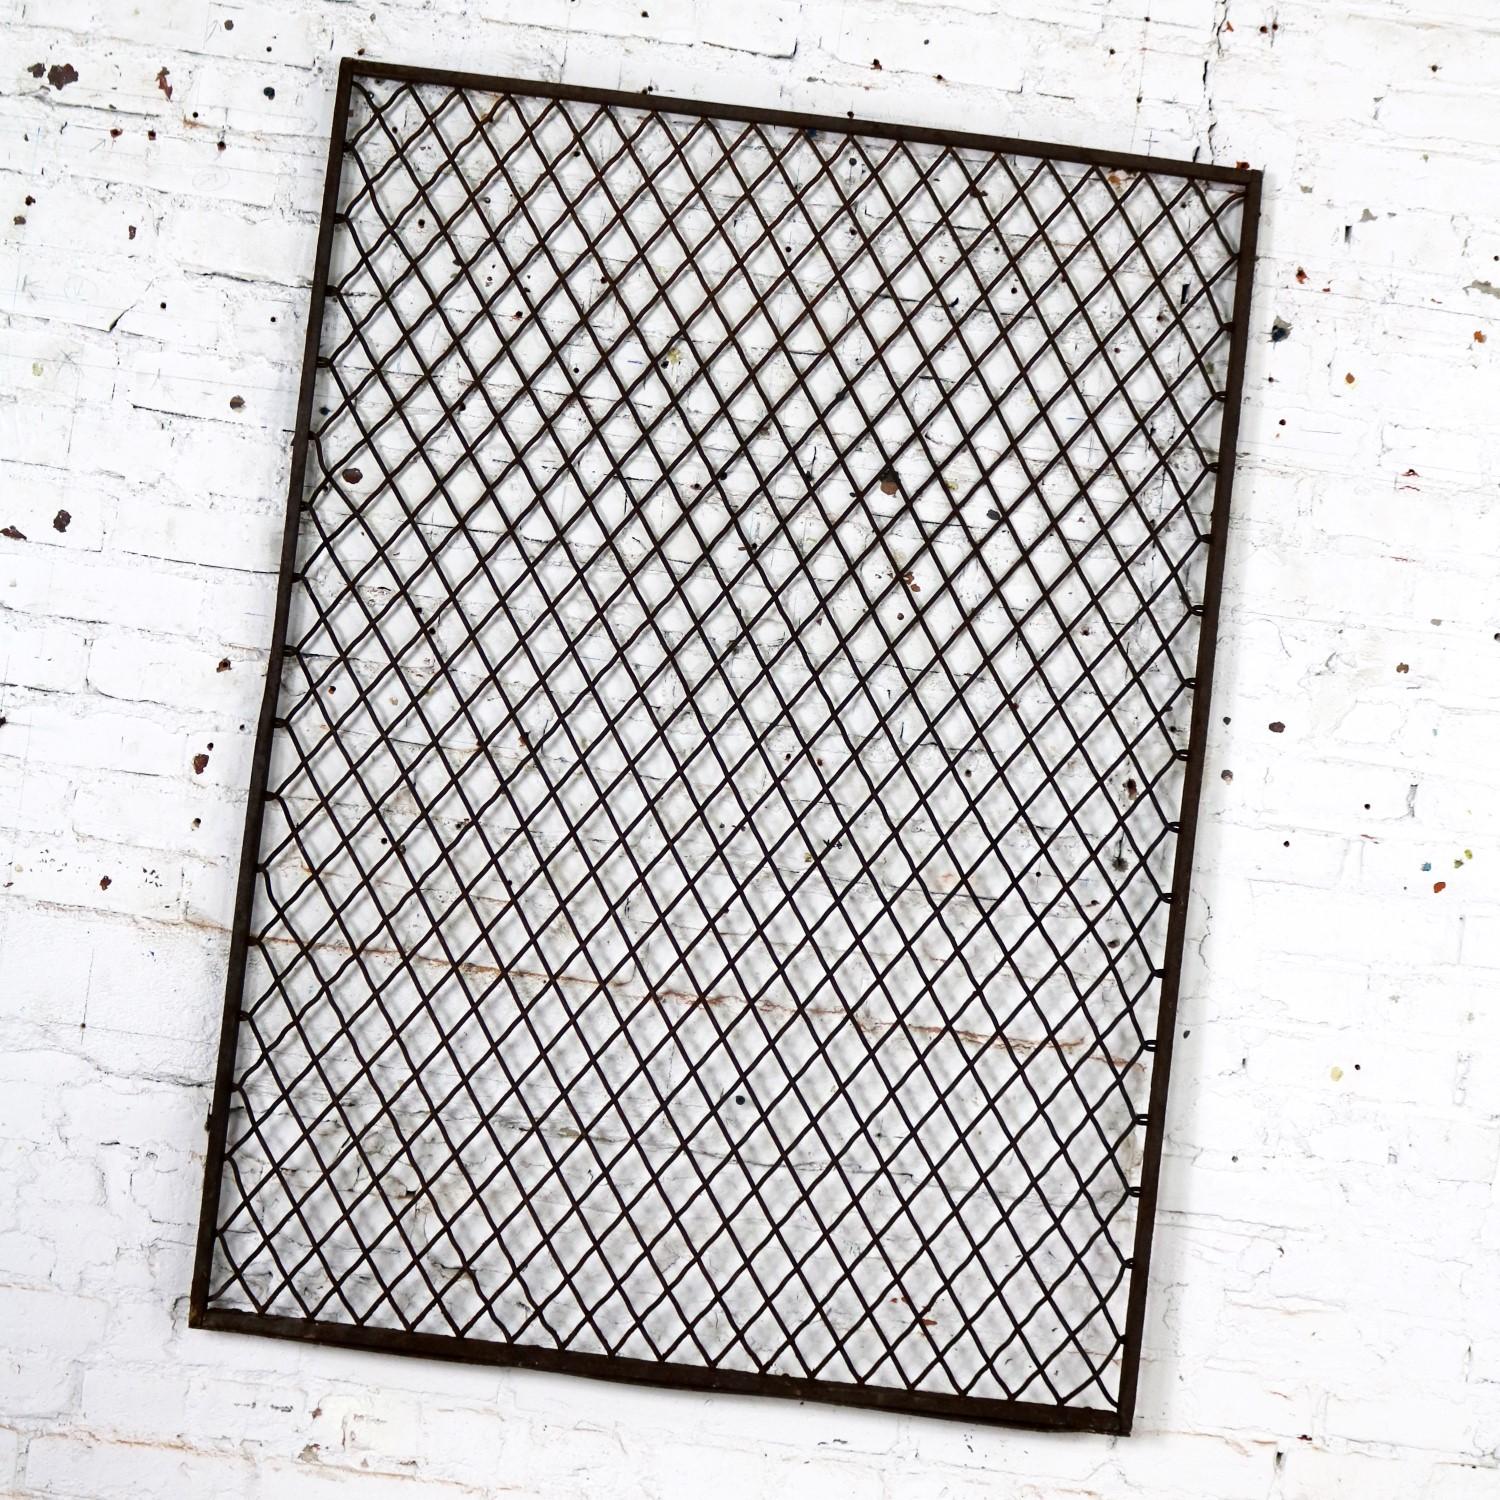 Interesting antique primitive and rustic woven wire industrial window security guard or grate. It is wonderful condition with lots of rusty age patina. Please see photos, circa 1920s-1950s.

This rustic industrial window grate will look fantastic in